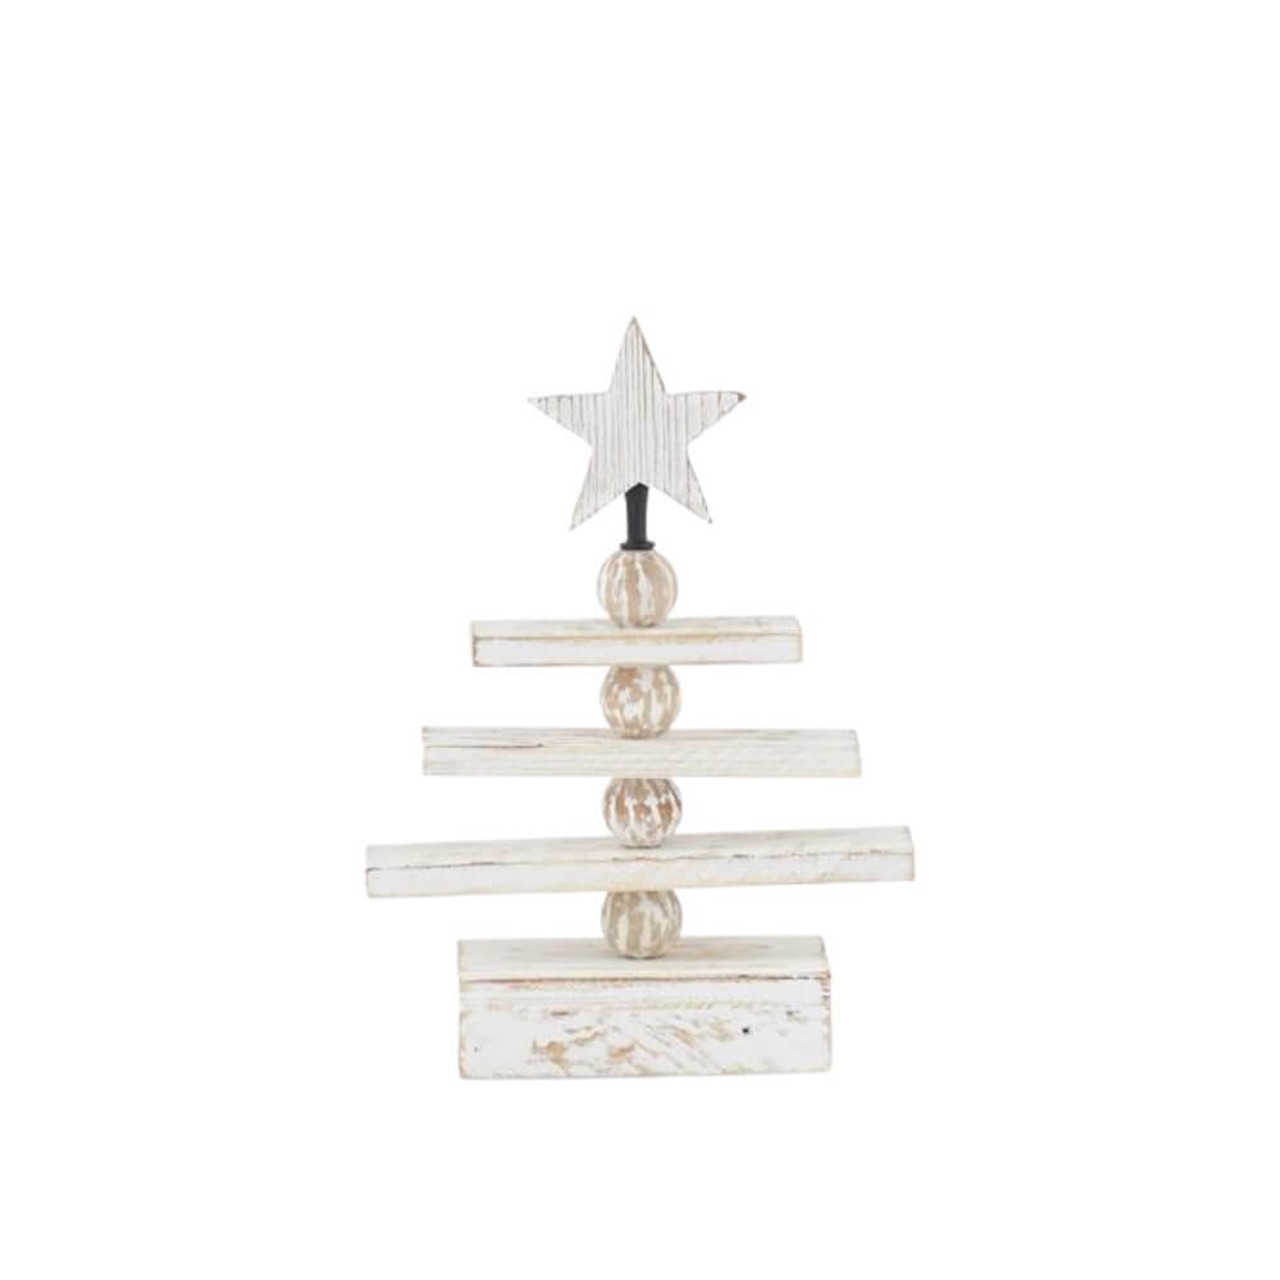 K & K Wood Plank Posable Tree with Star Top